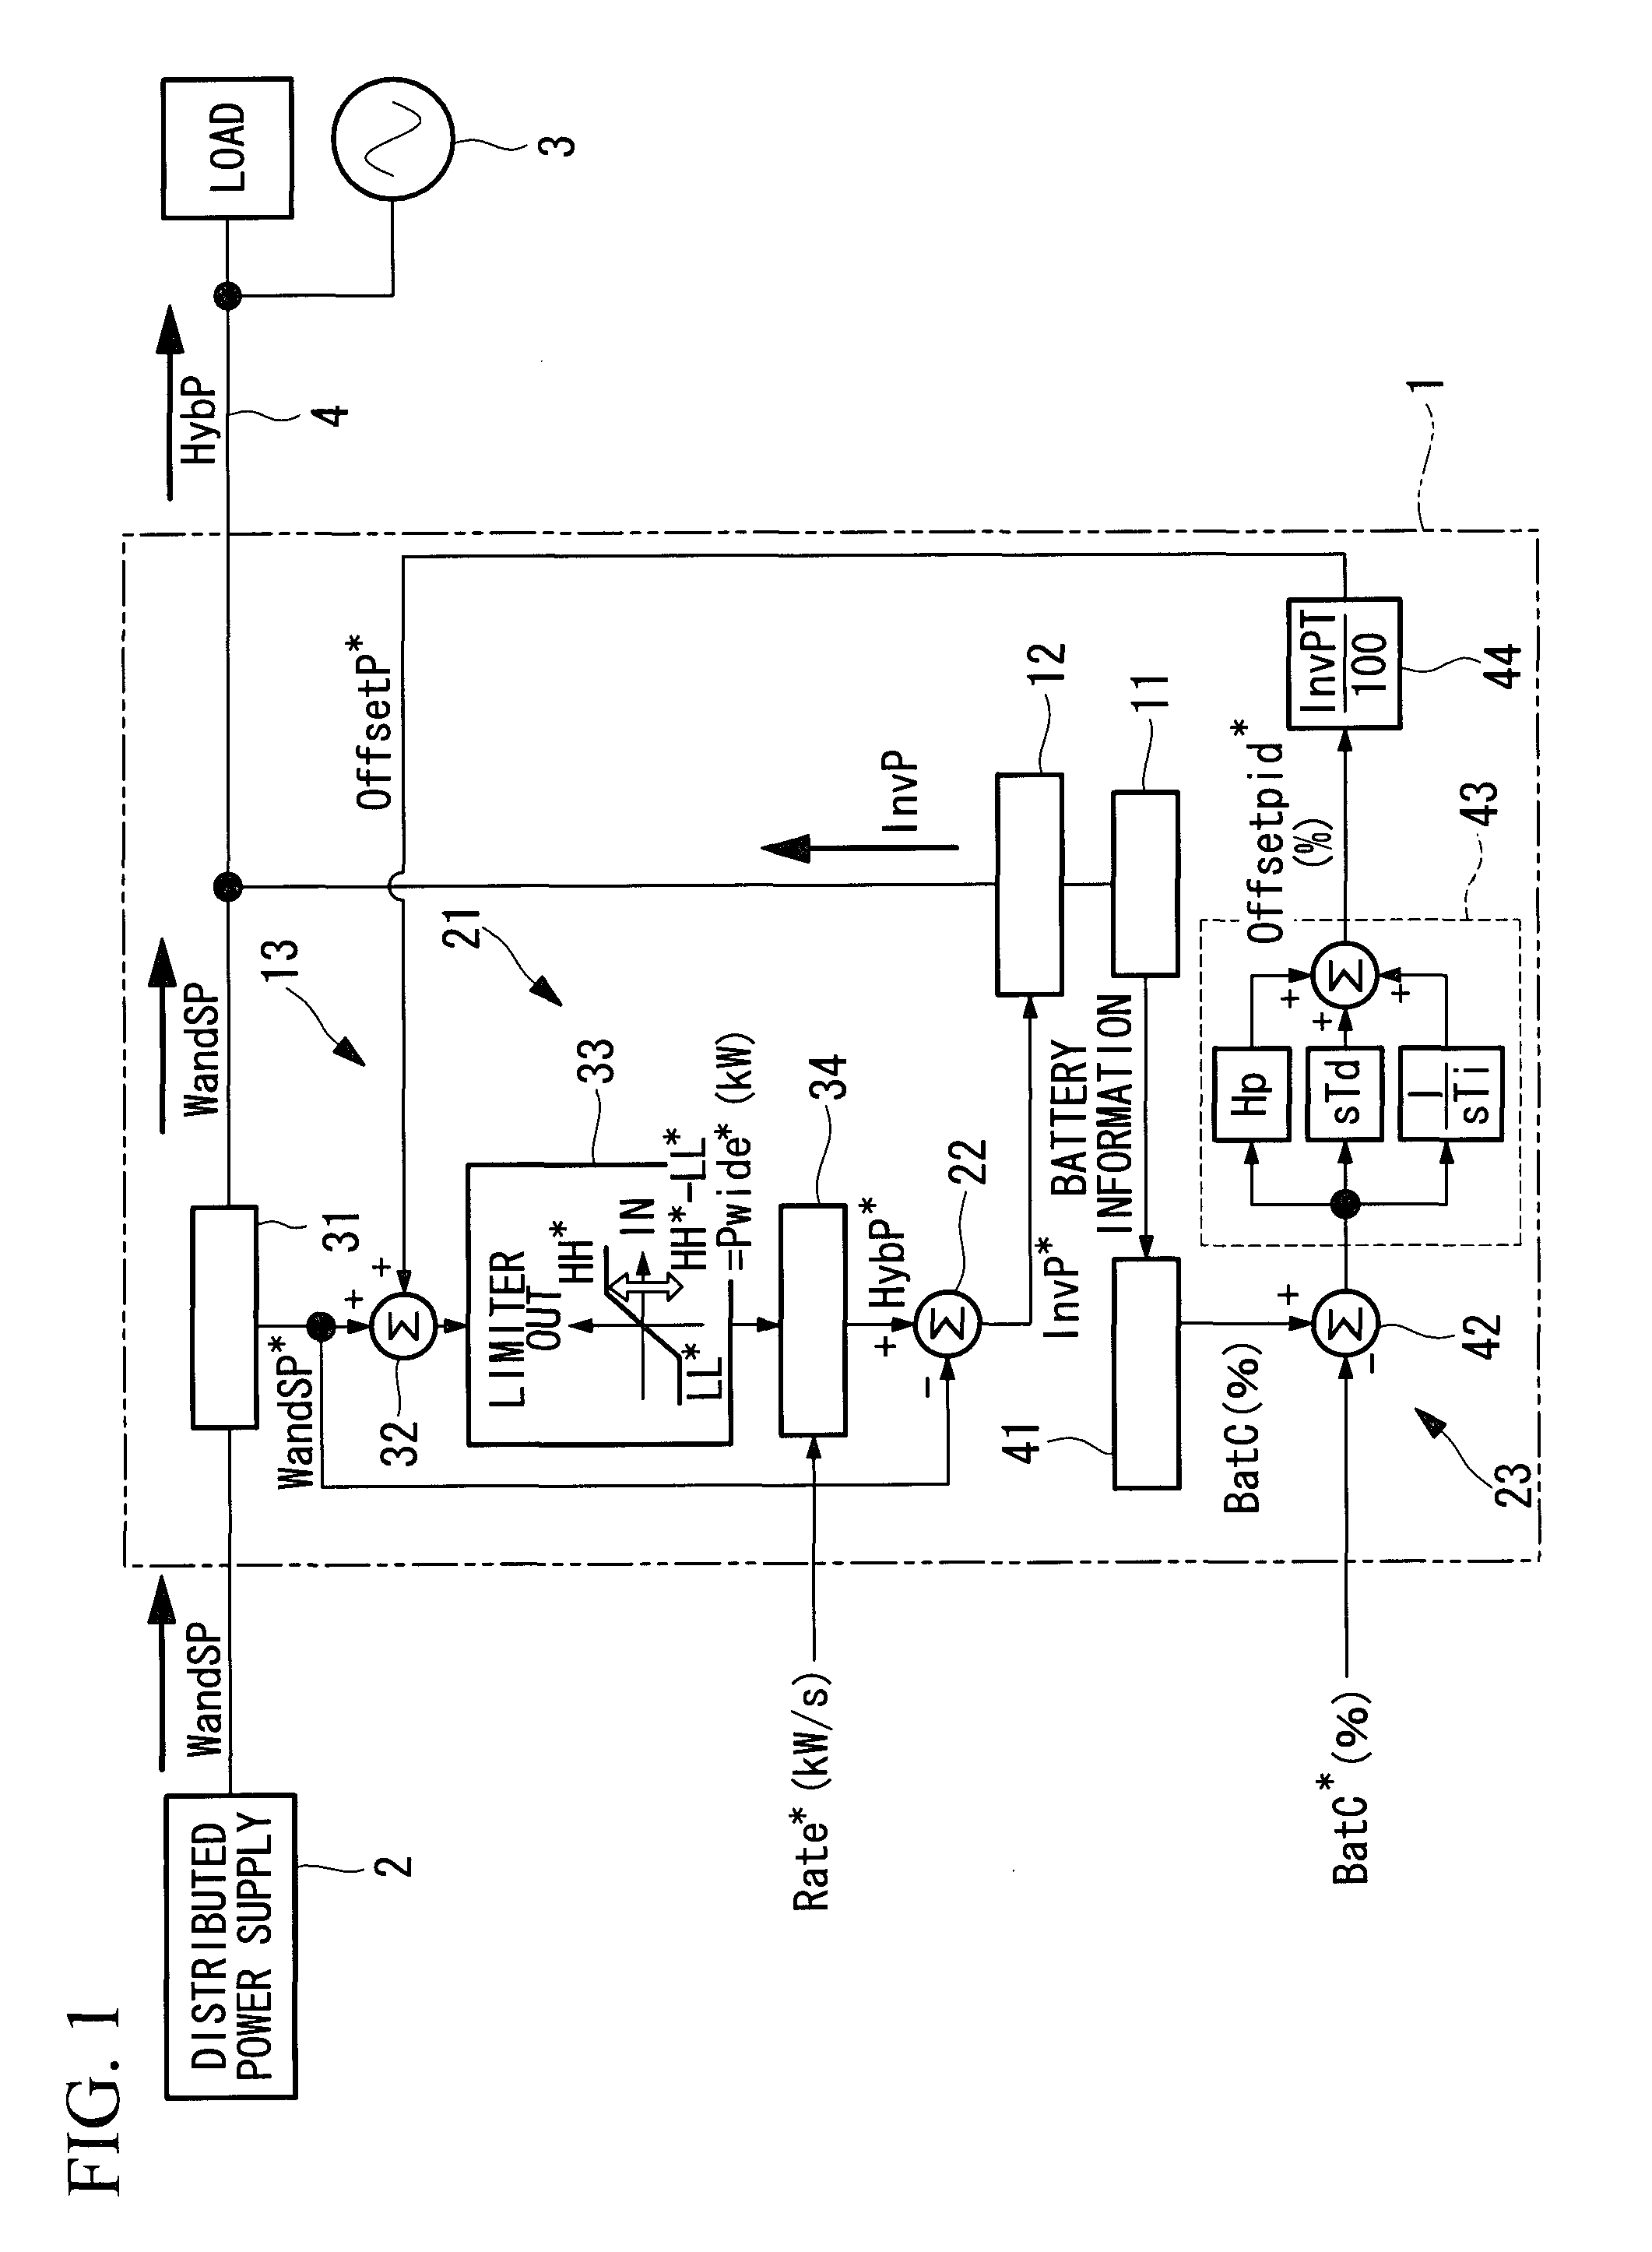 Electricity storage device and hybrid distributed power supply system